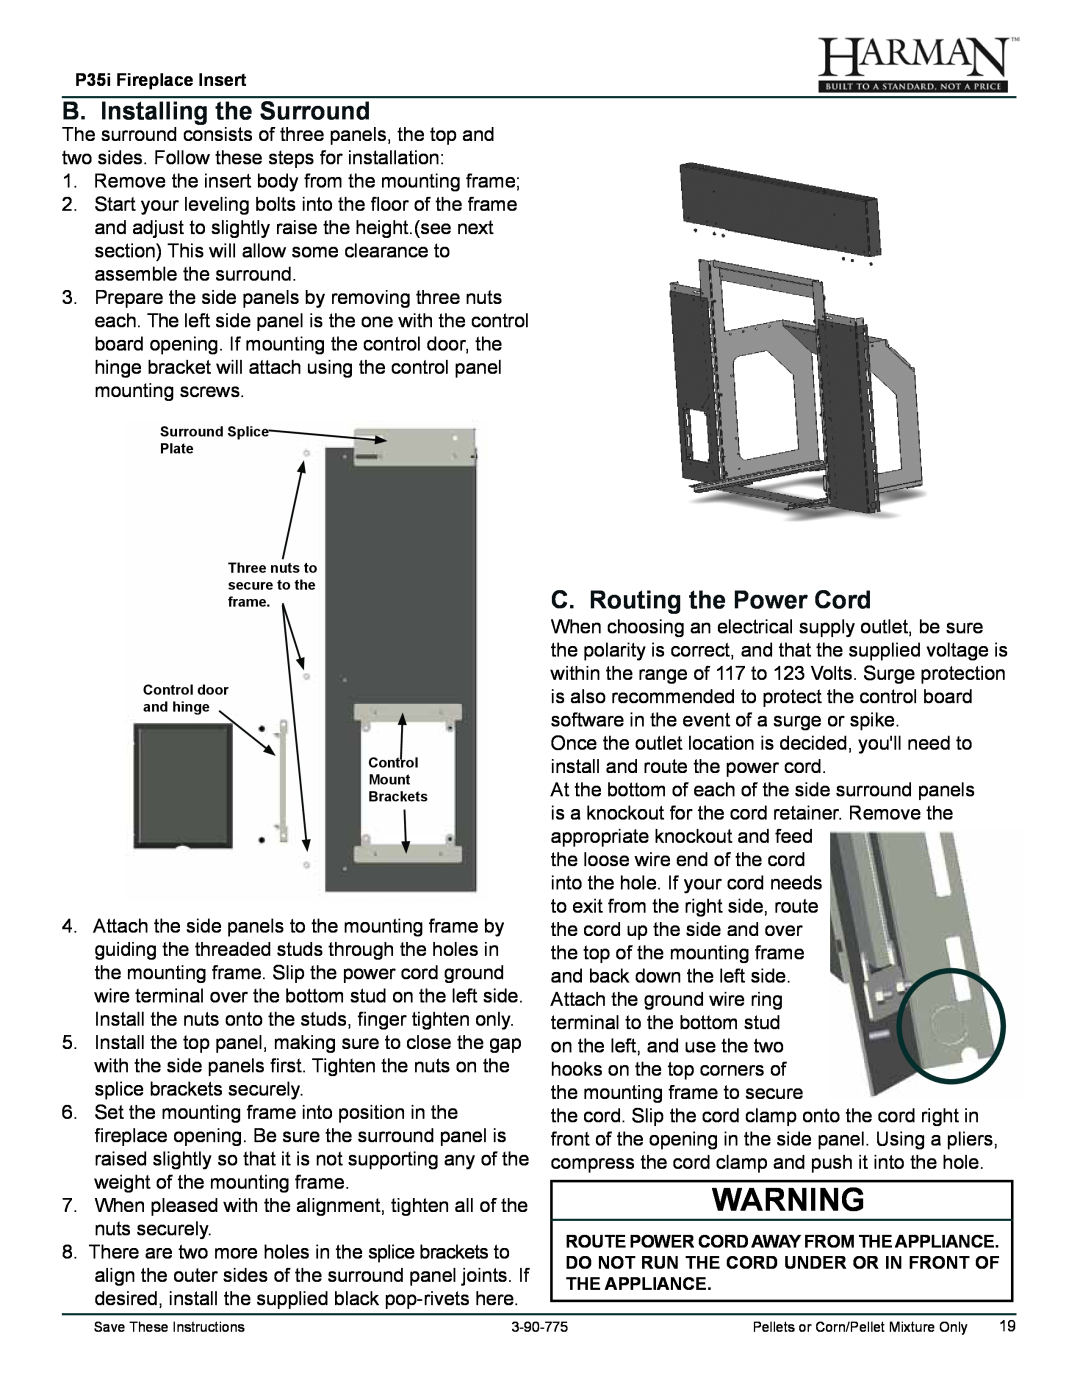 Harman Stove Company P35I owner manual B. Installing the Surround, C. Routing the Power Cord 